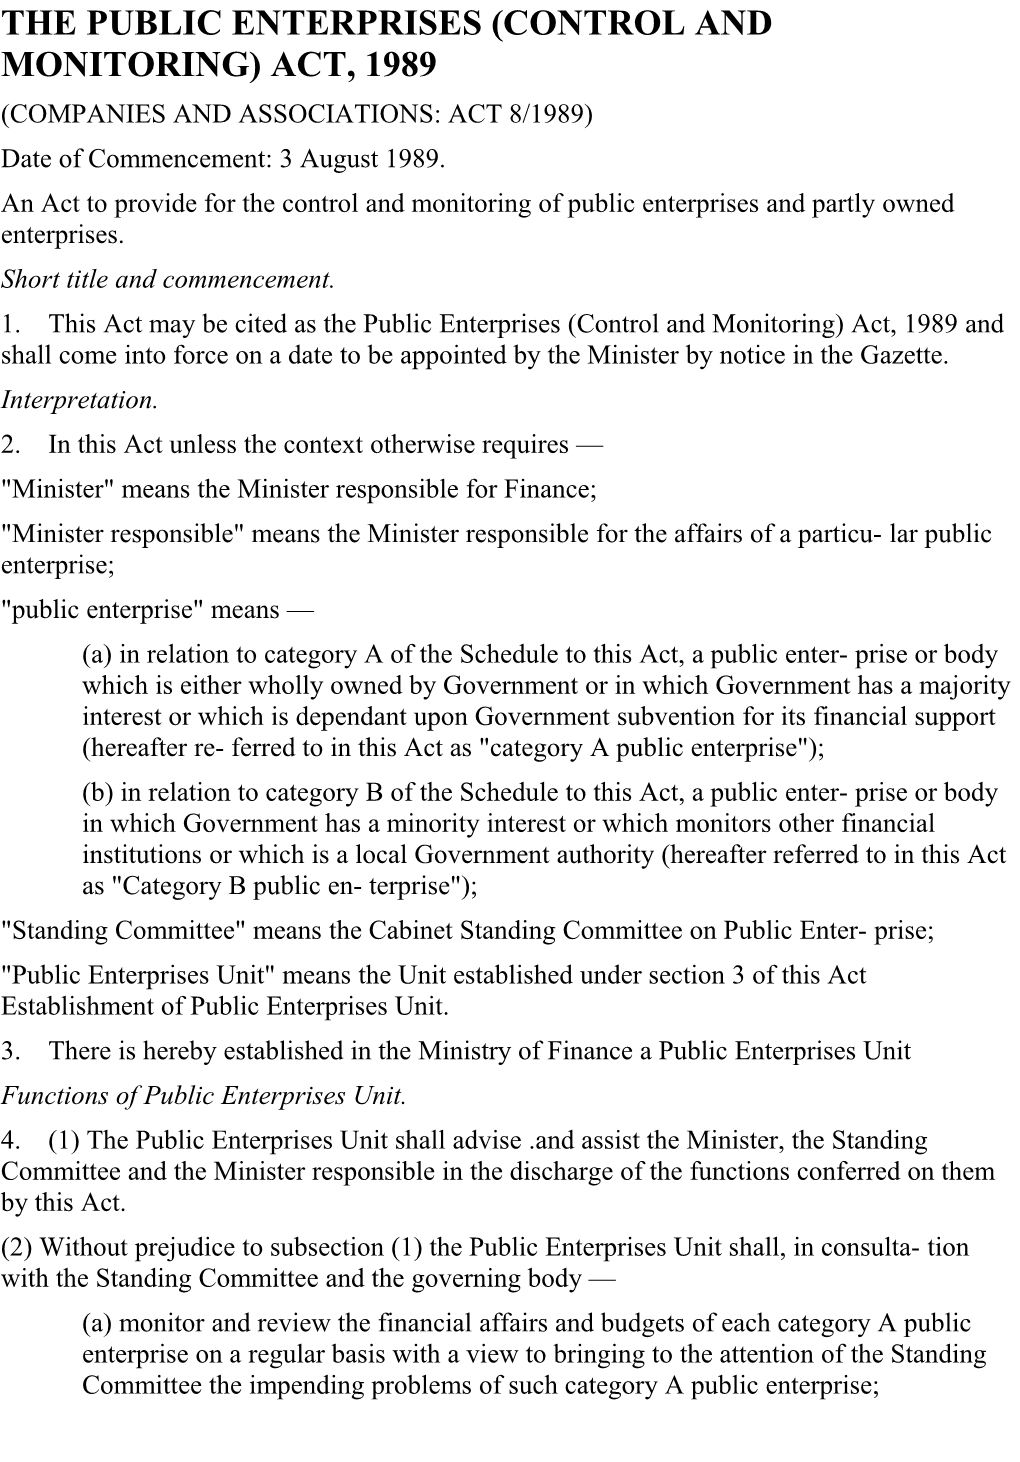 The Public Enterprises (Control and Monitoring) Act, 1989